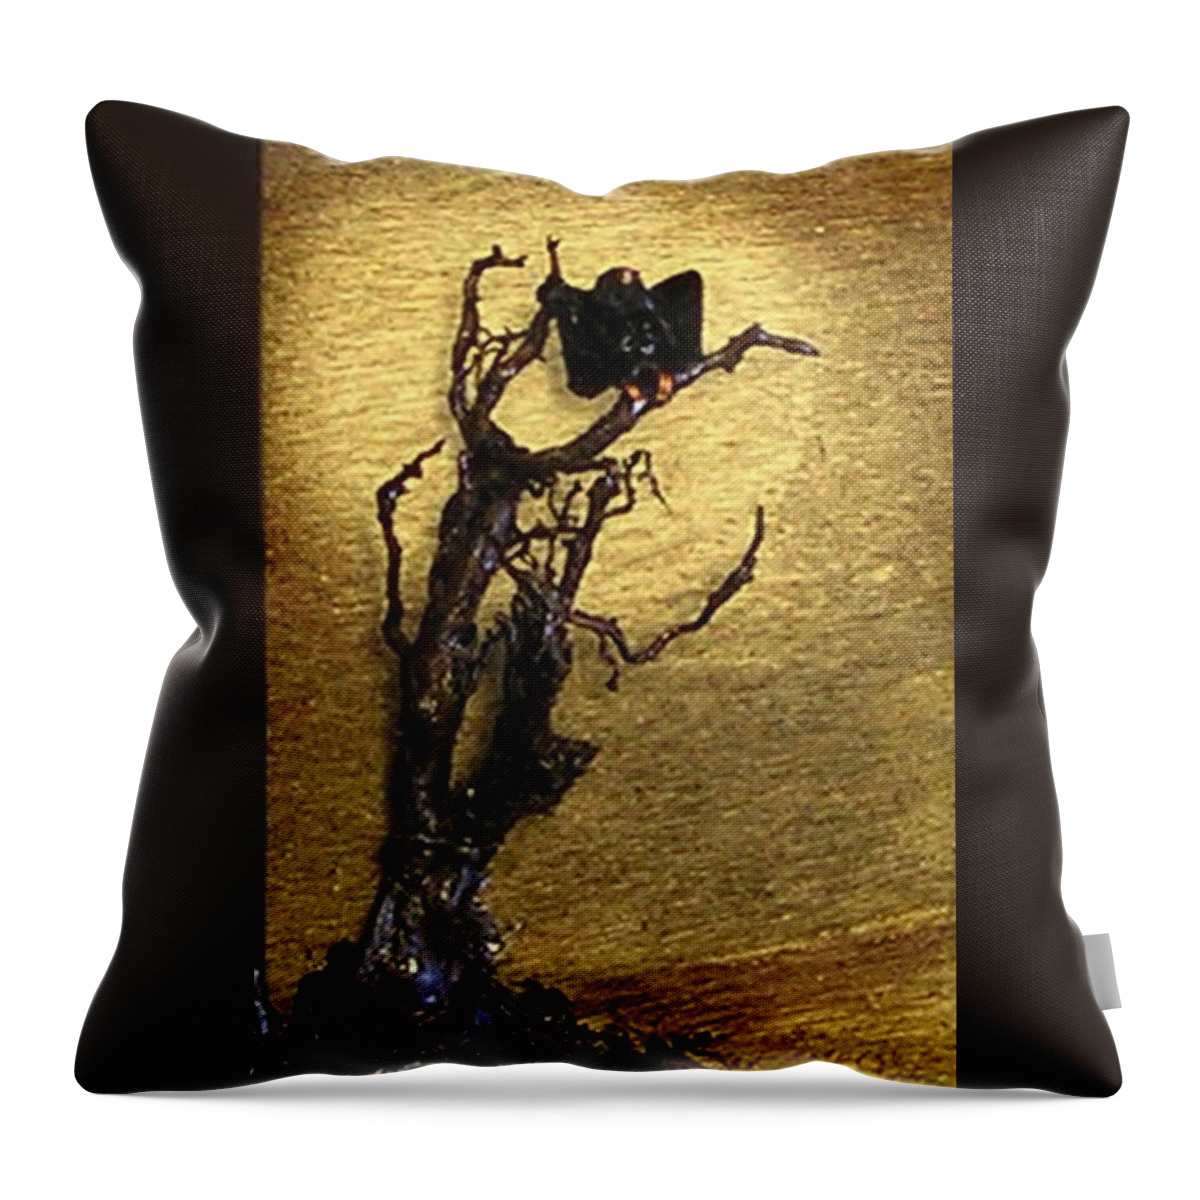 Vulture Throw Pillow featuring the mixed media Vulture with Textured Sun by Roger Swezey